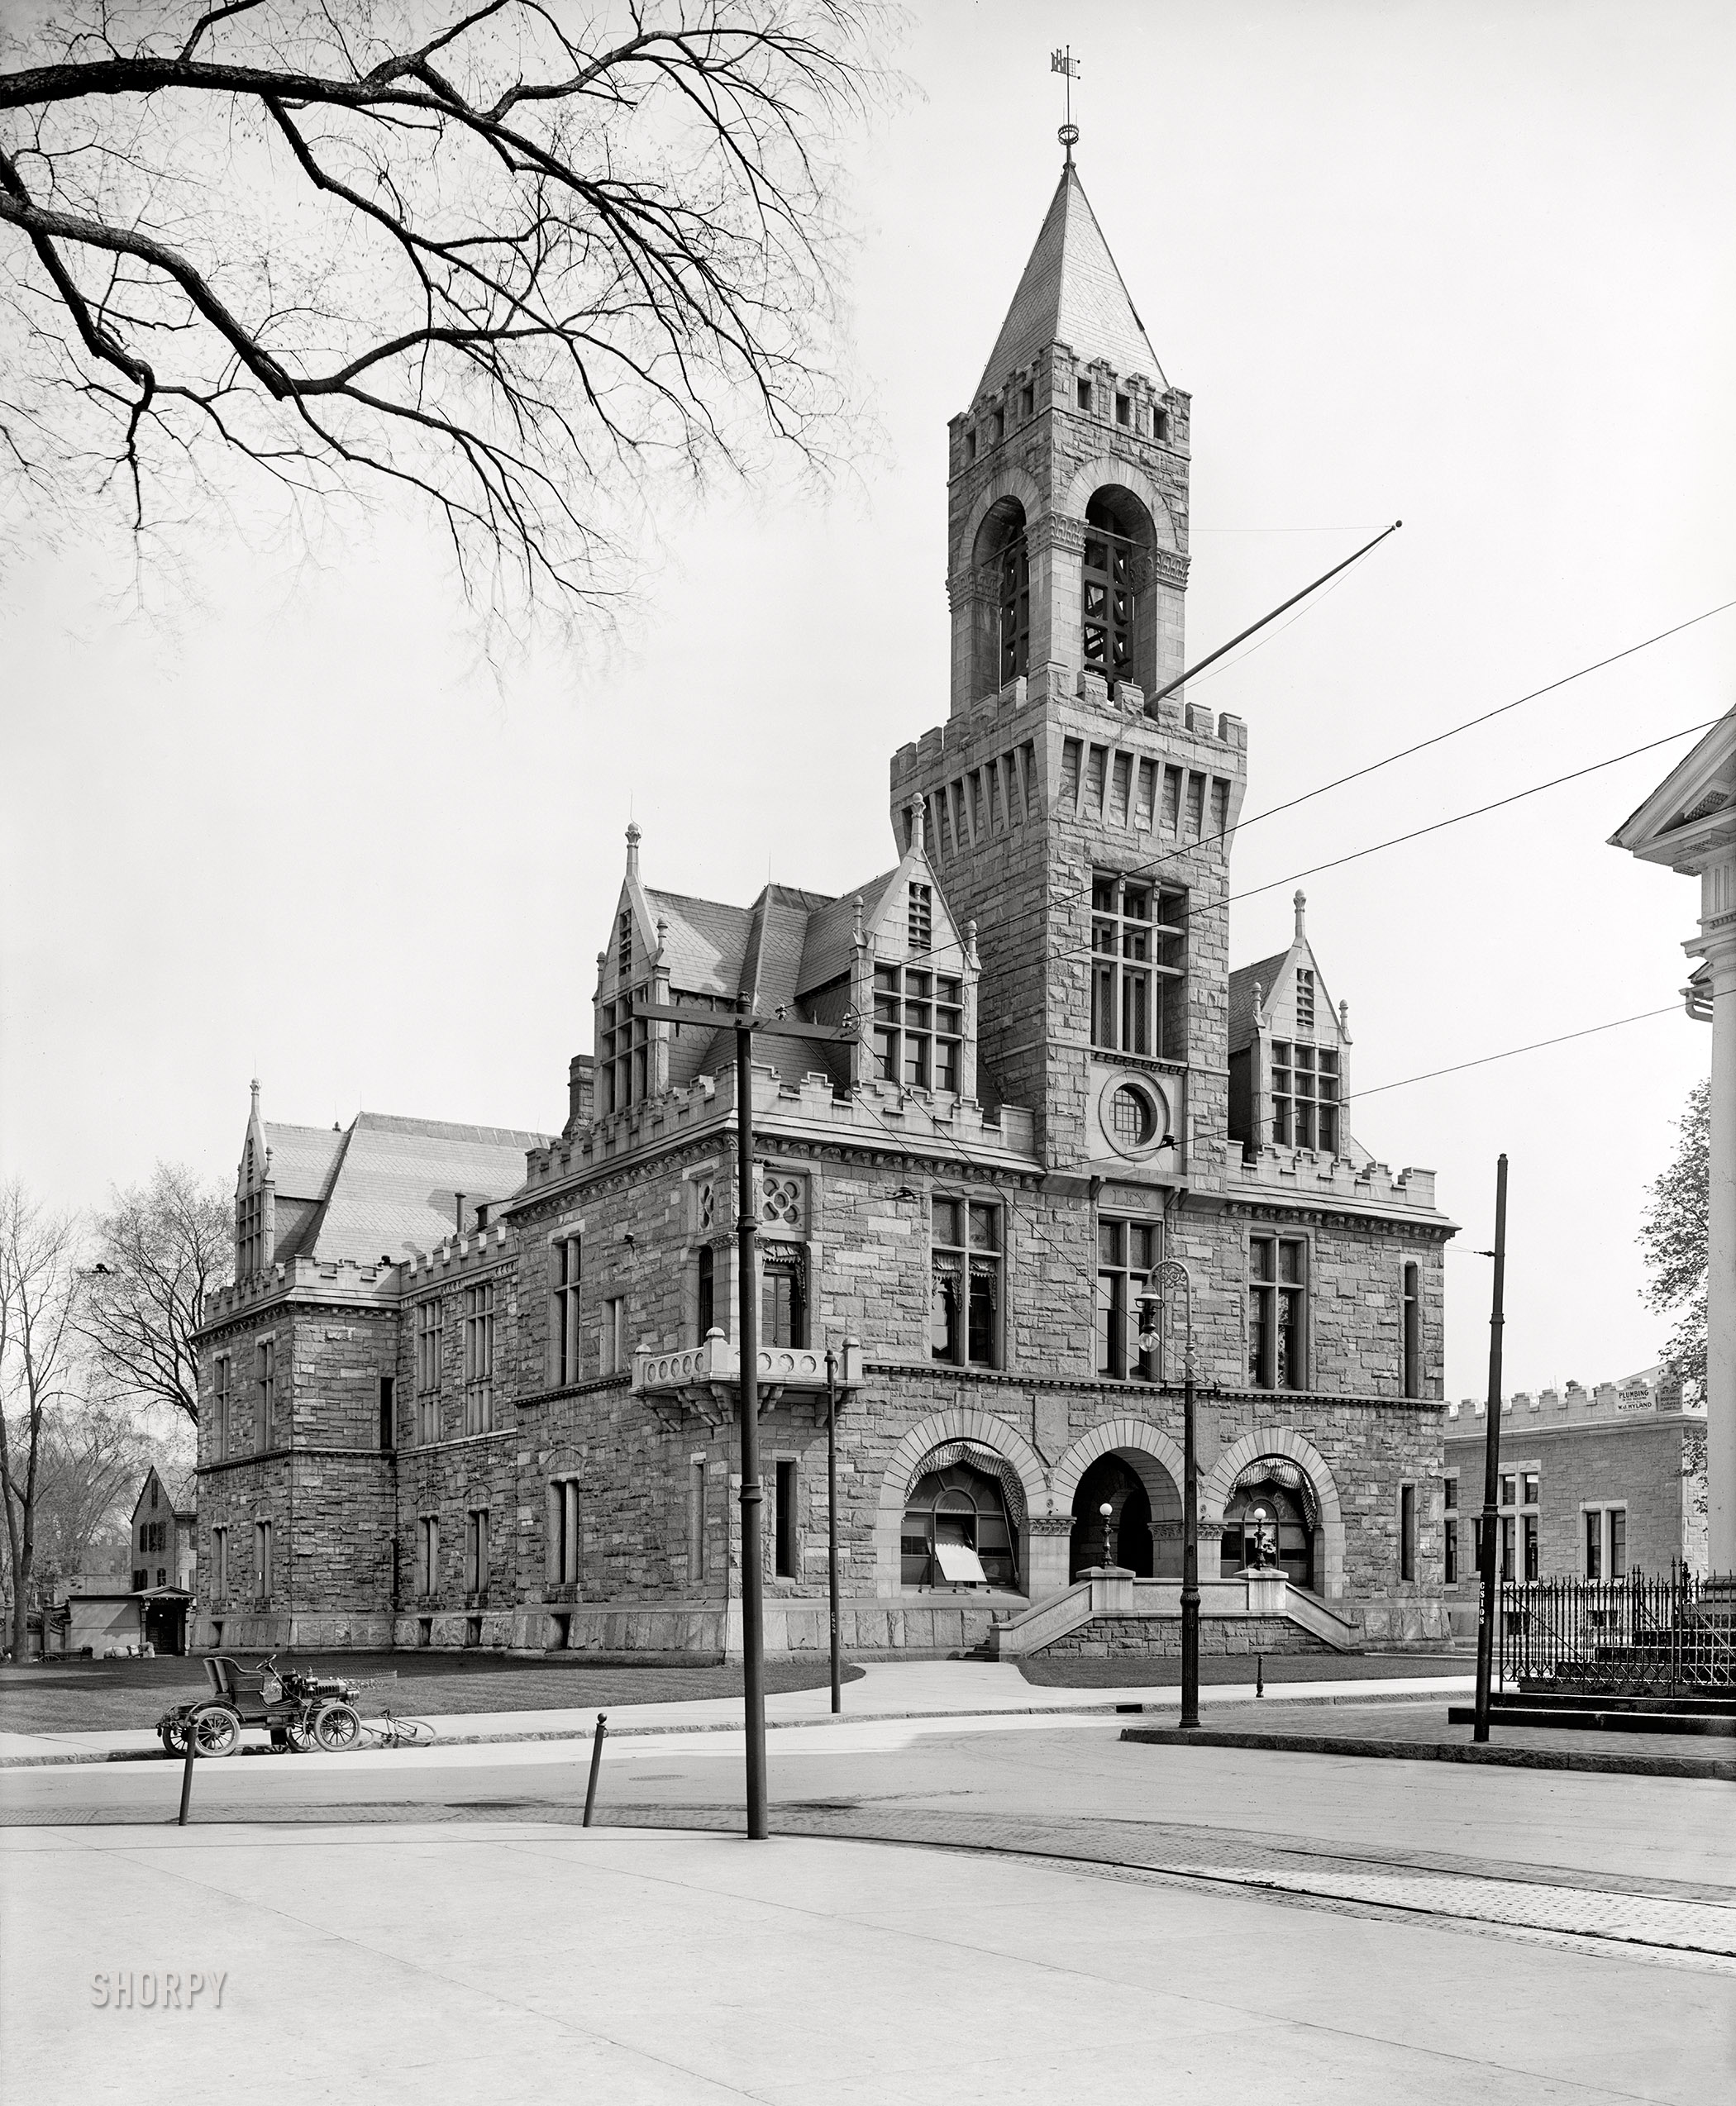 Springfield, Massachusetts, circa 1908. "Hampden County Courthouse, Elm Street." 8x10 inch dry plate glass negative, Detroit Publishing Company. View full size.